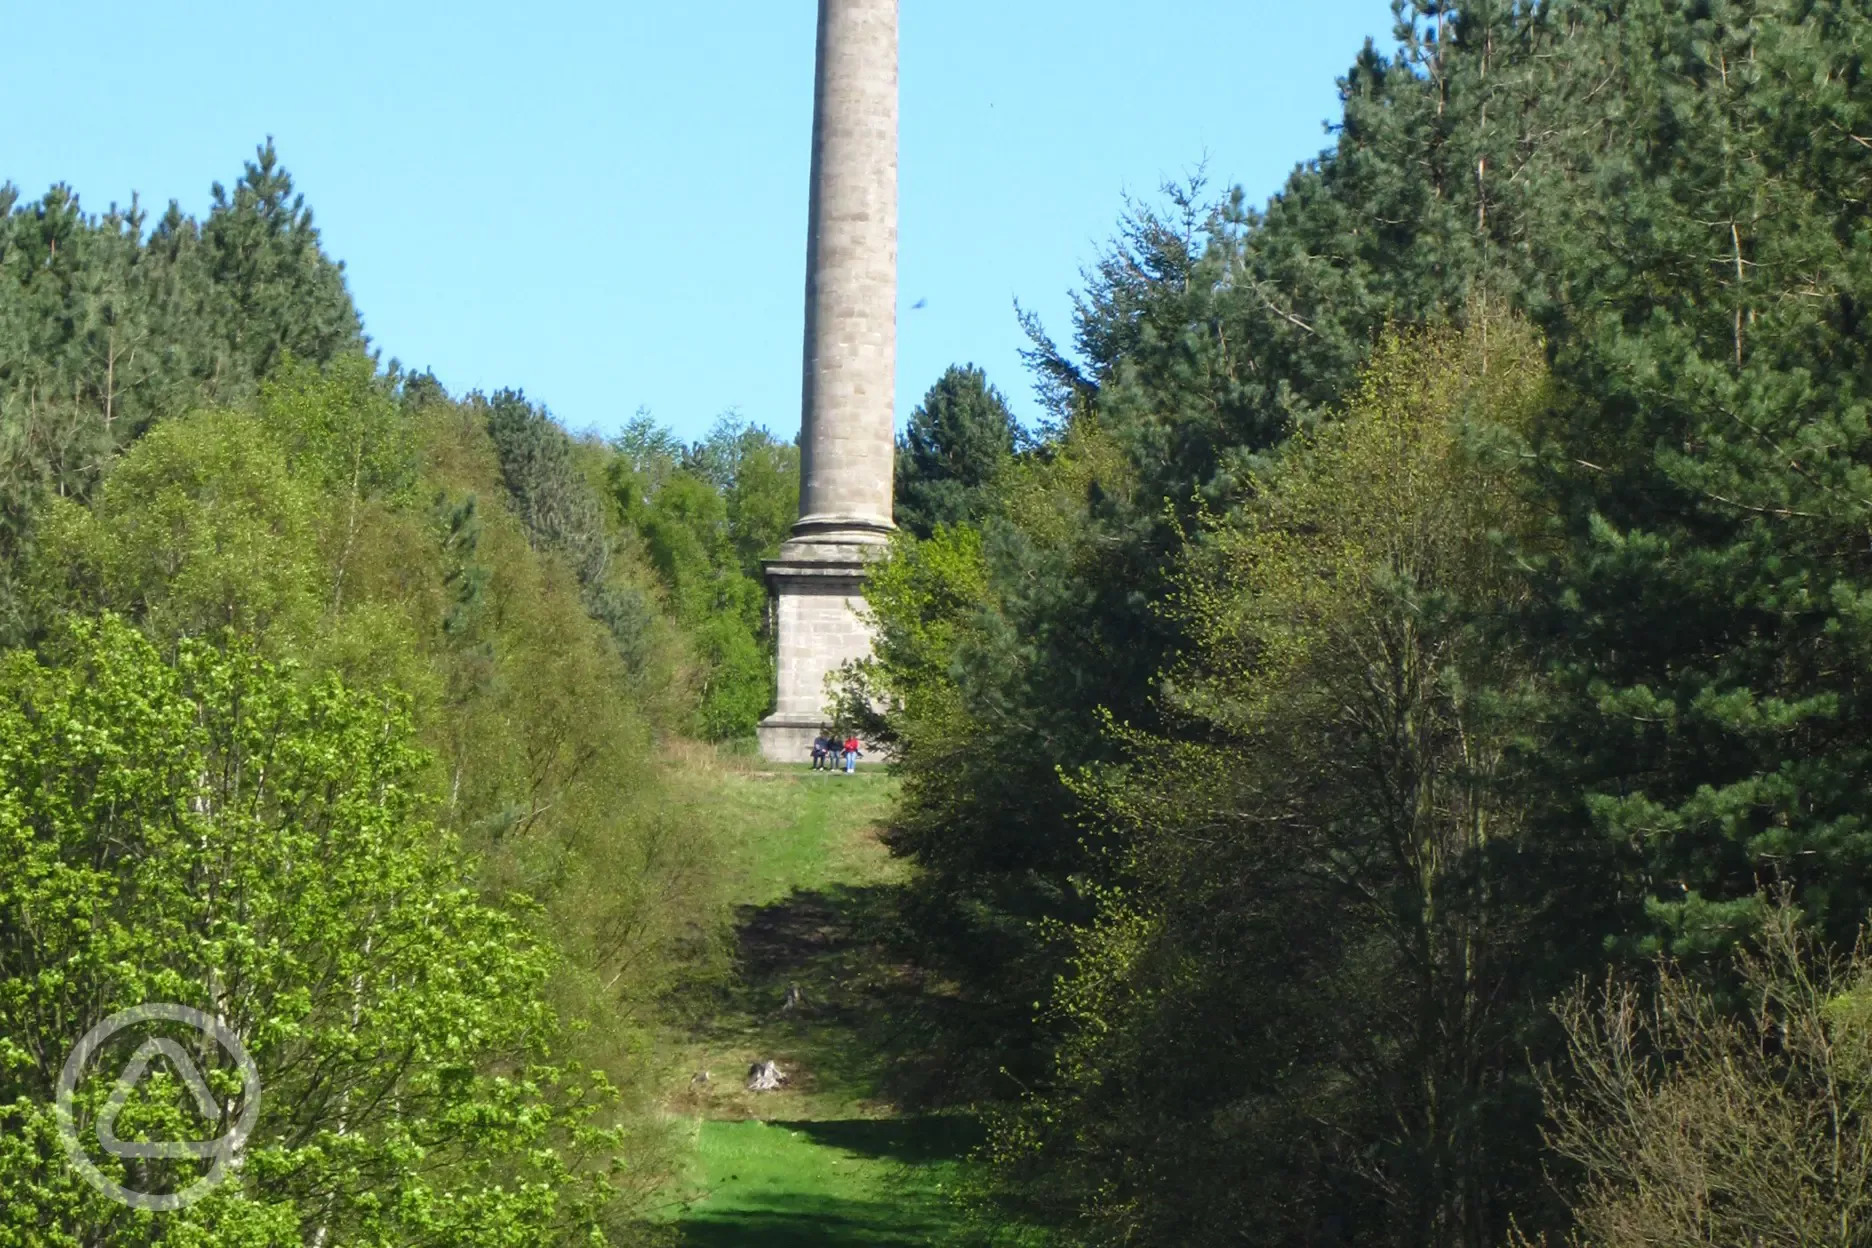 Situated next to The National Trust Gibside Site